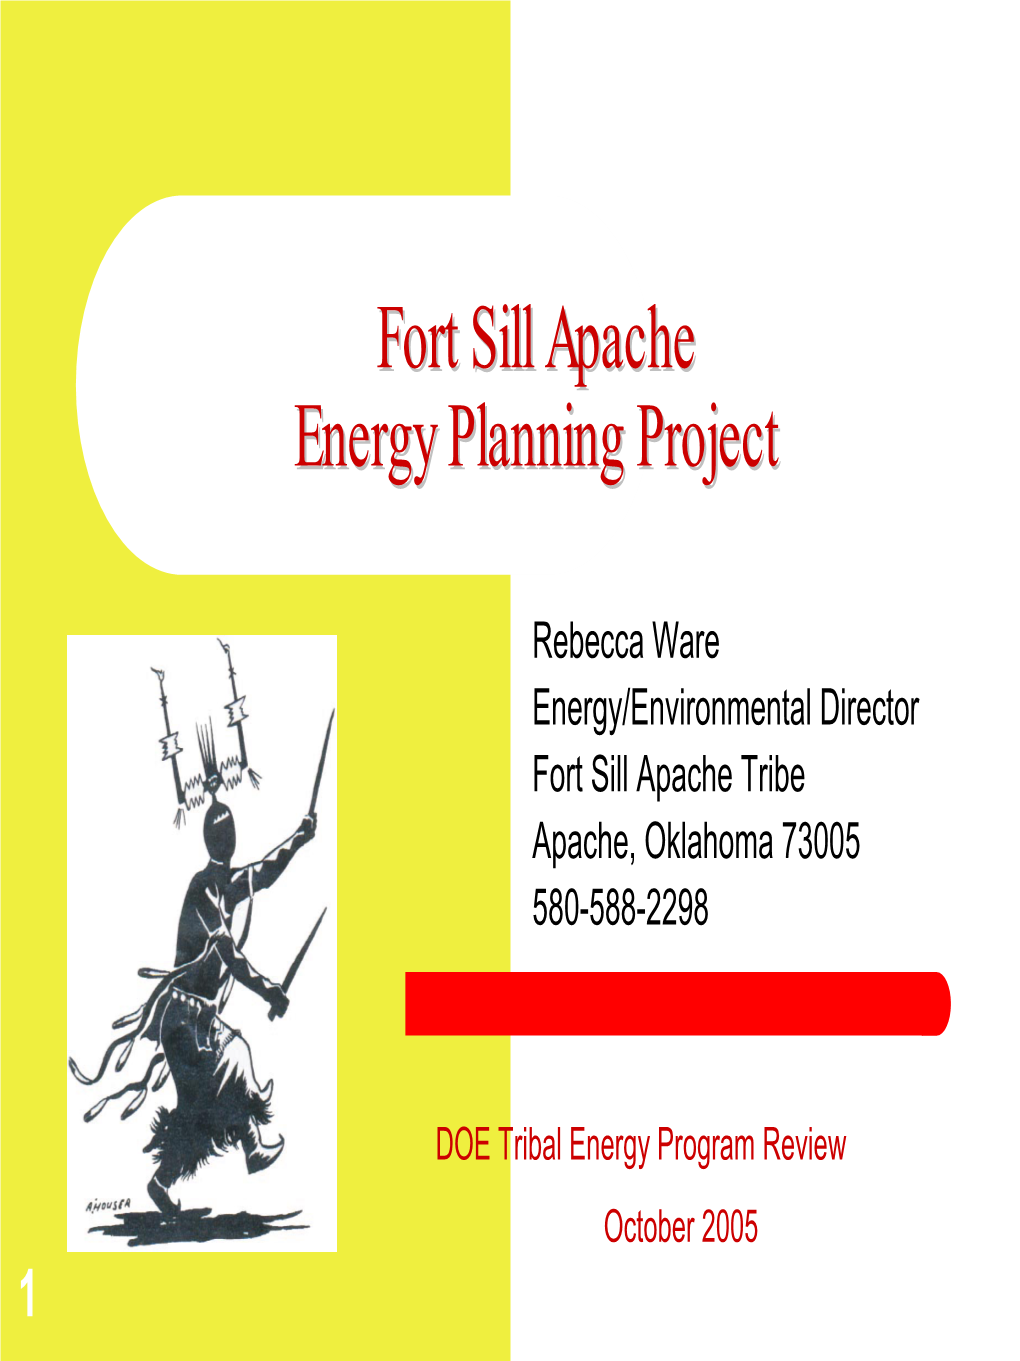 Fort Sill Apache Energy Planning Project